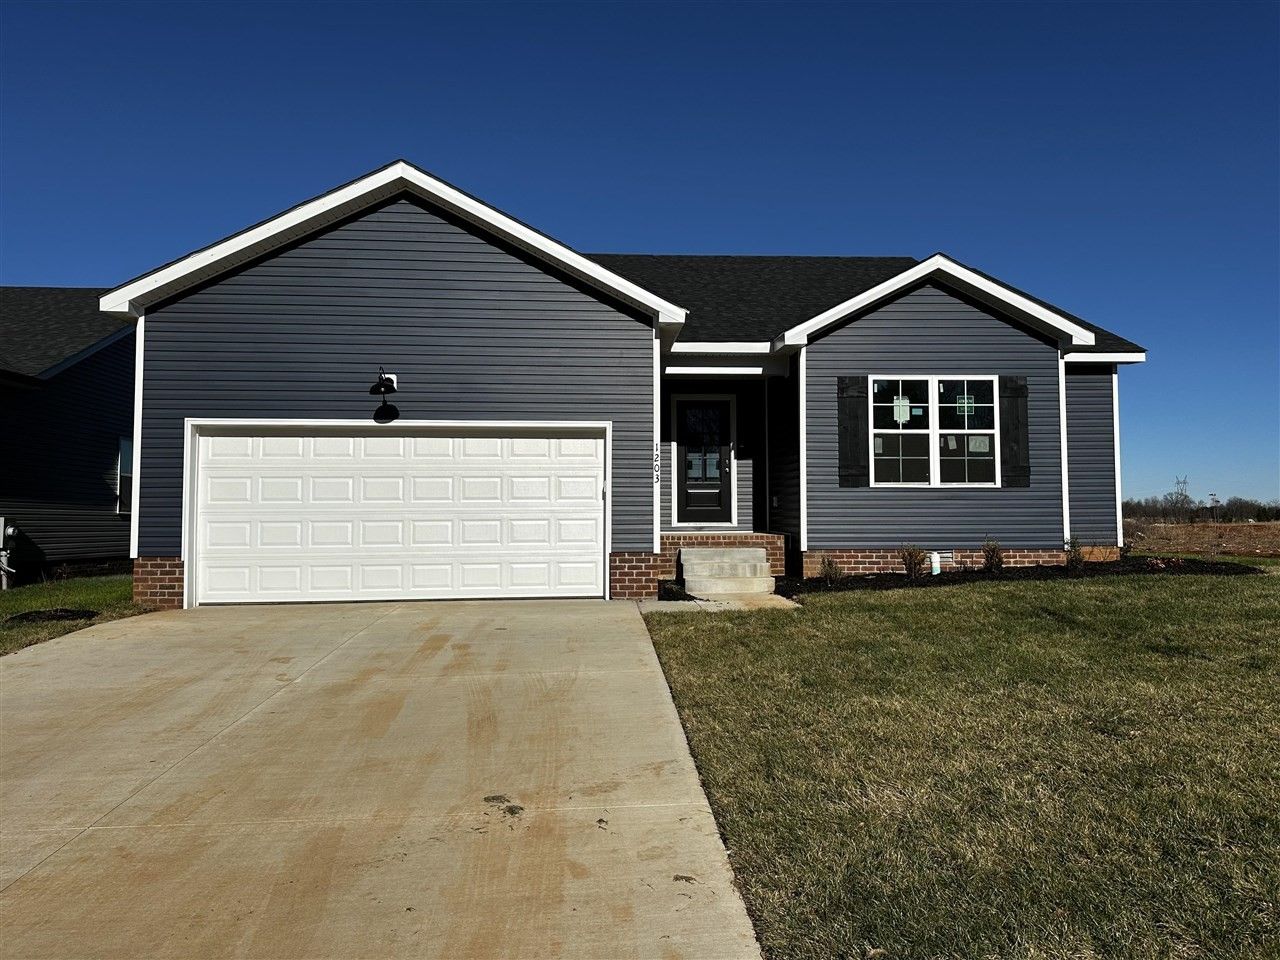 Lot 12 Melody Avenue. Bowling Green, KY 42101